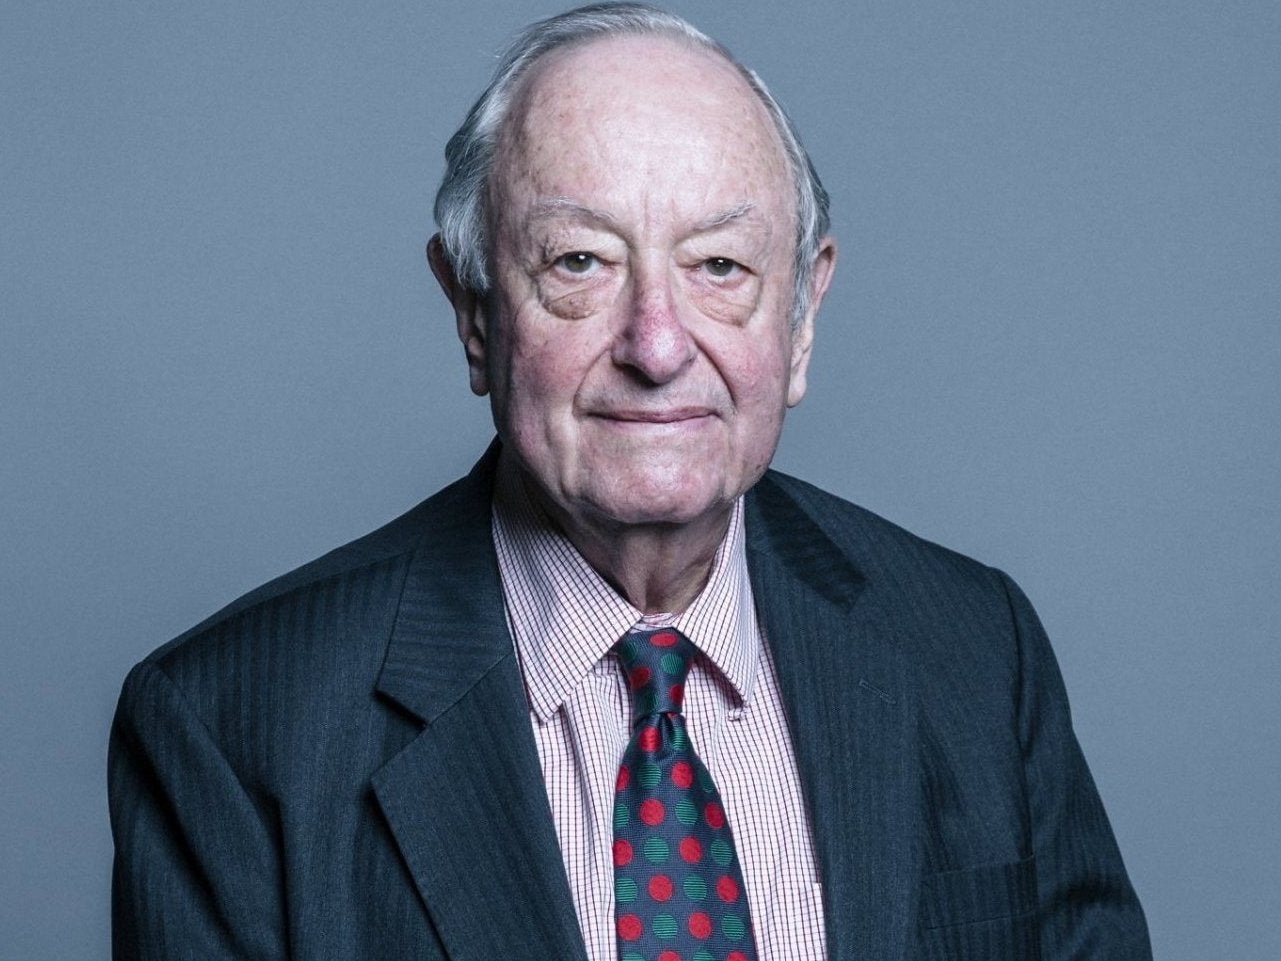 Lord Lester’s suspension was overturned by a vote in the House of Lords